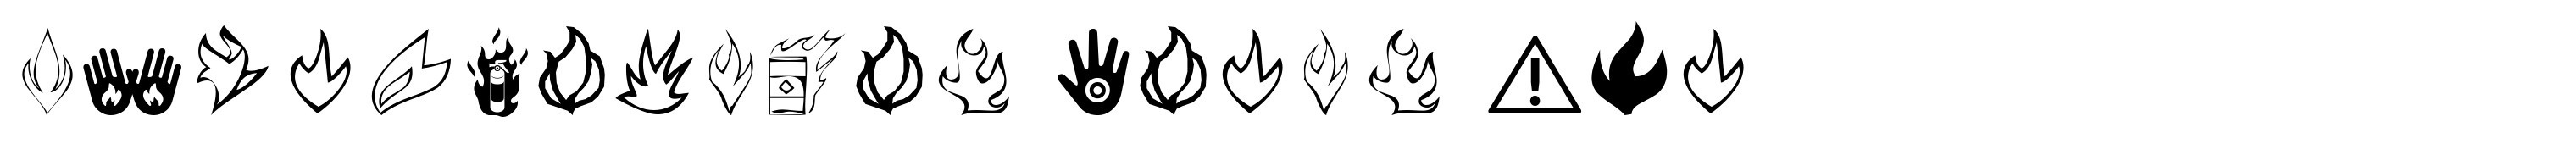 Pyrotechnics Icons Two